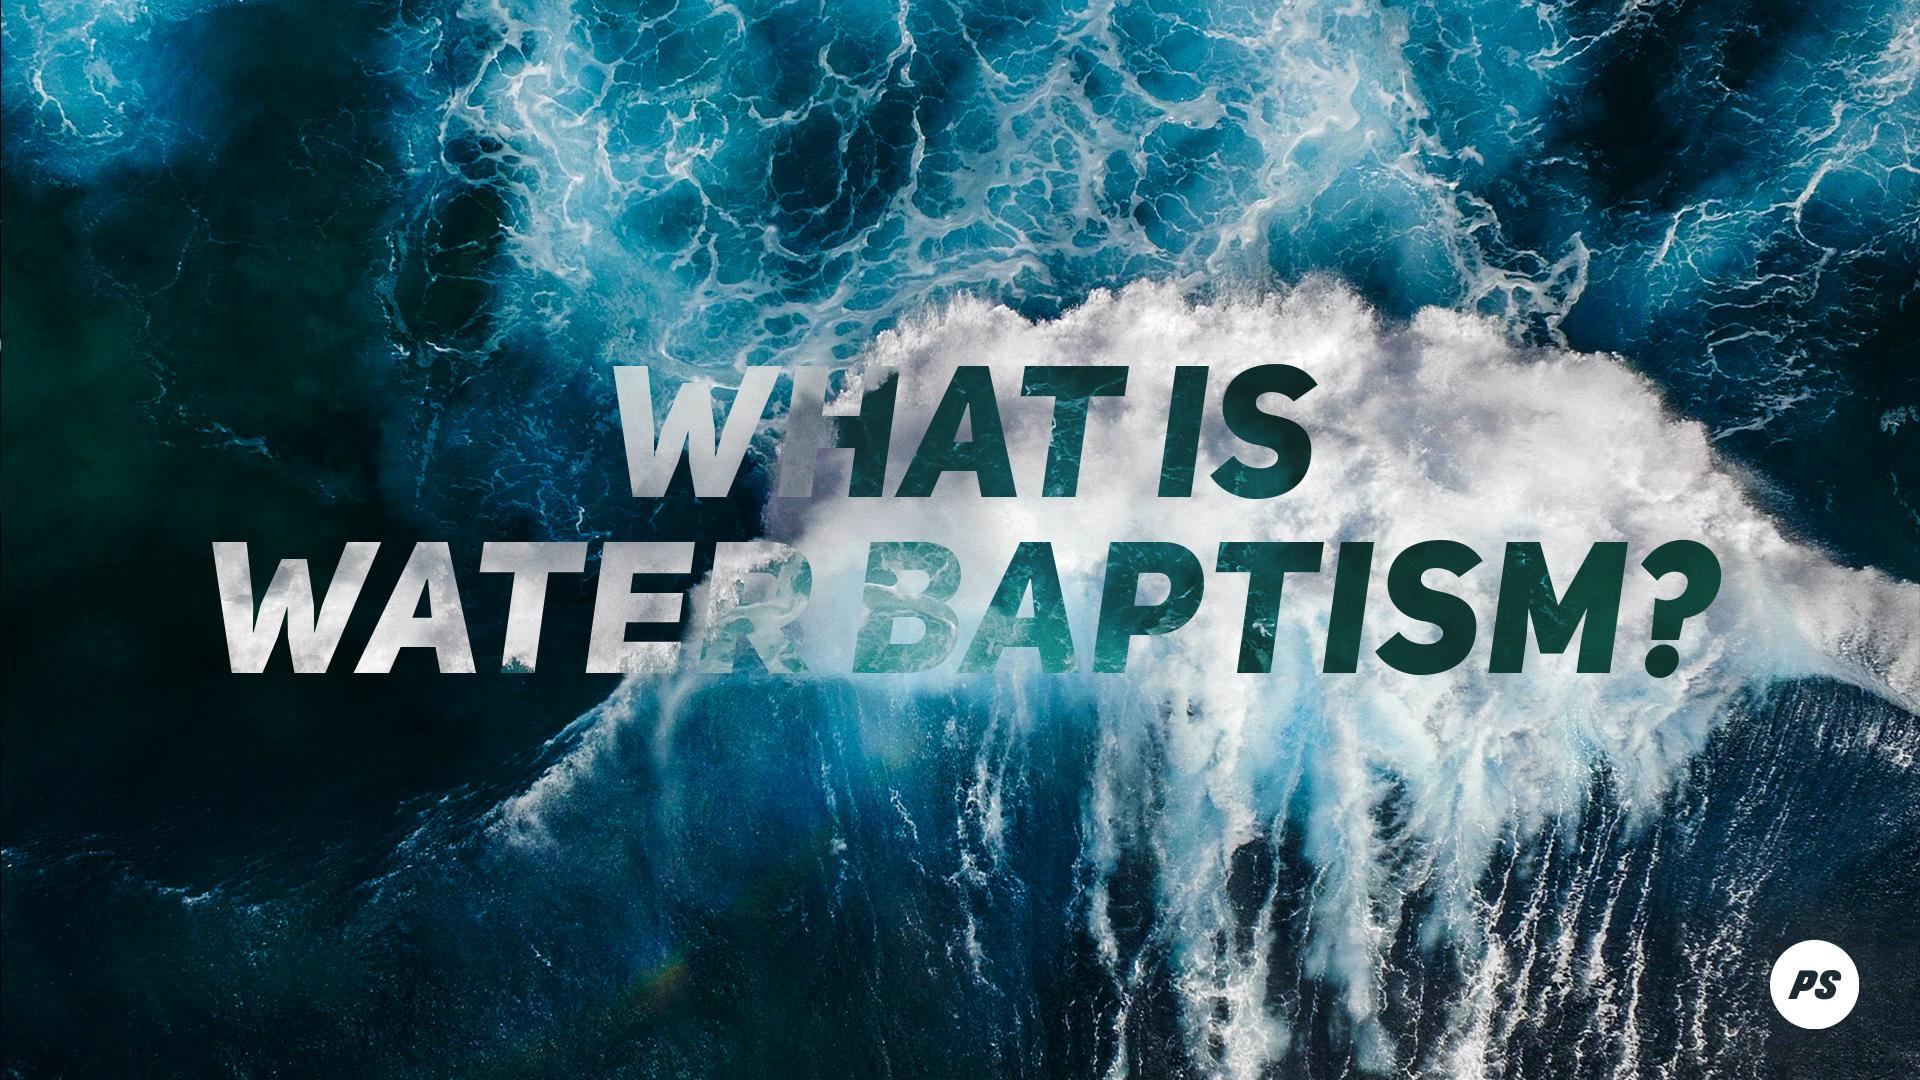 Featured image for “What is water baptism?”